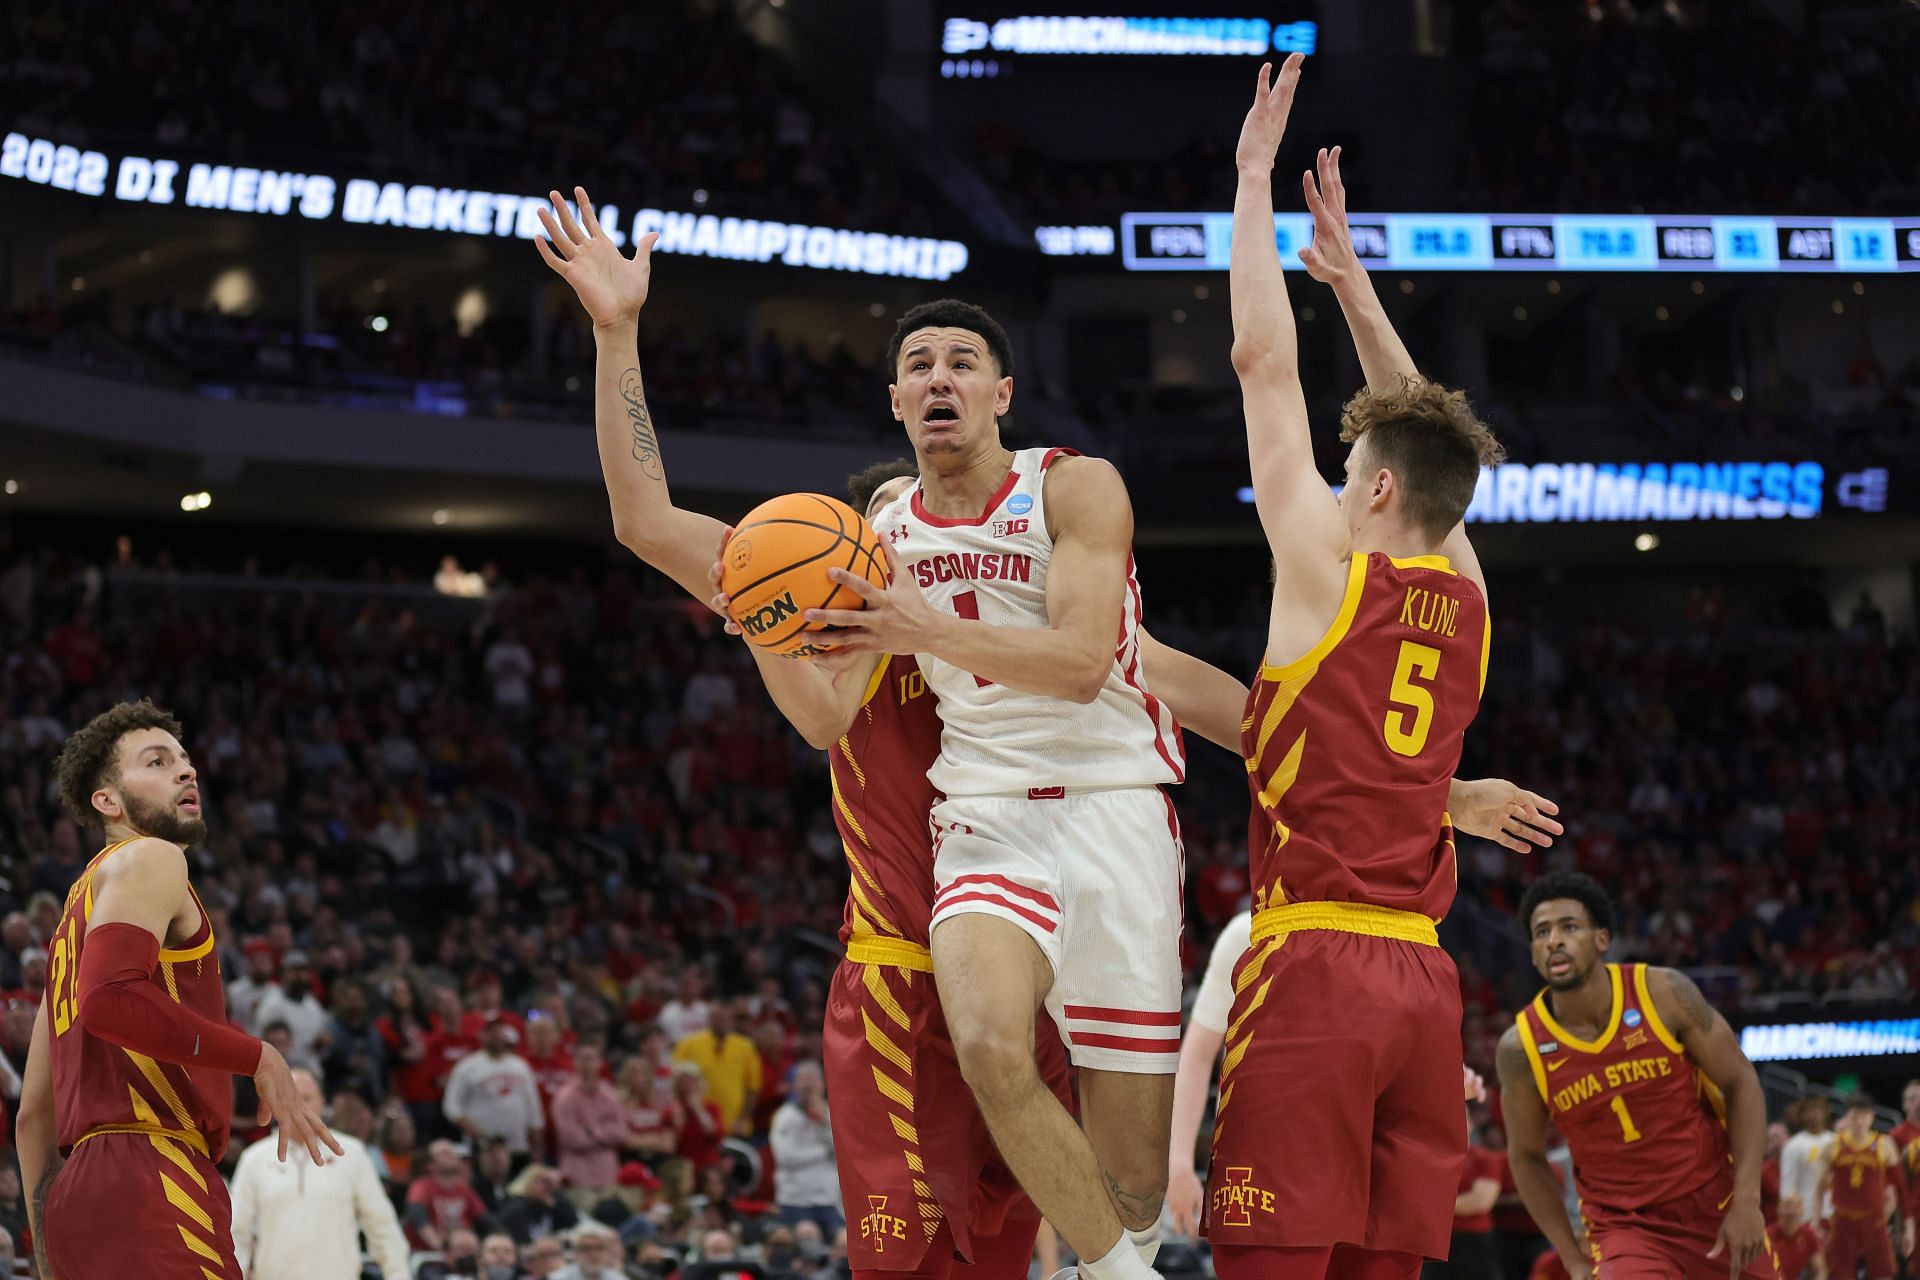 Johnny Davis led a mediocre Wisconsin team to become one of the best teams in the Big 10.